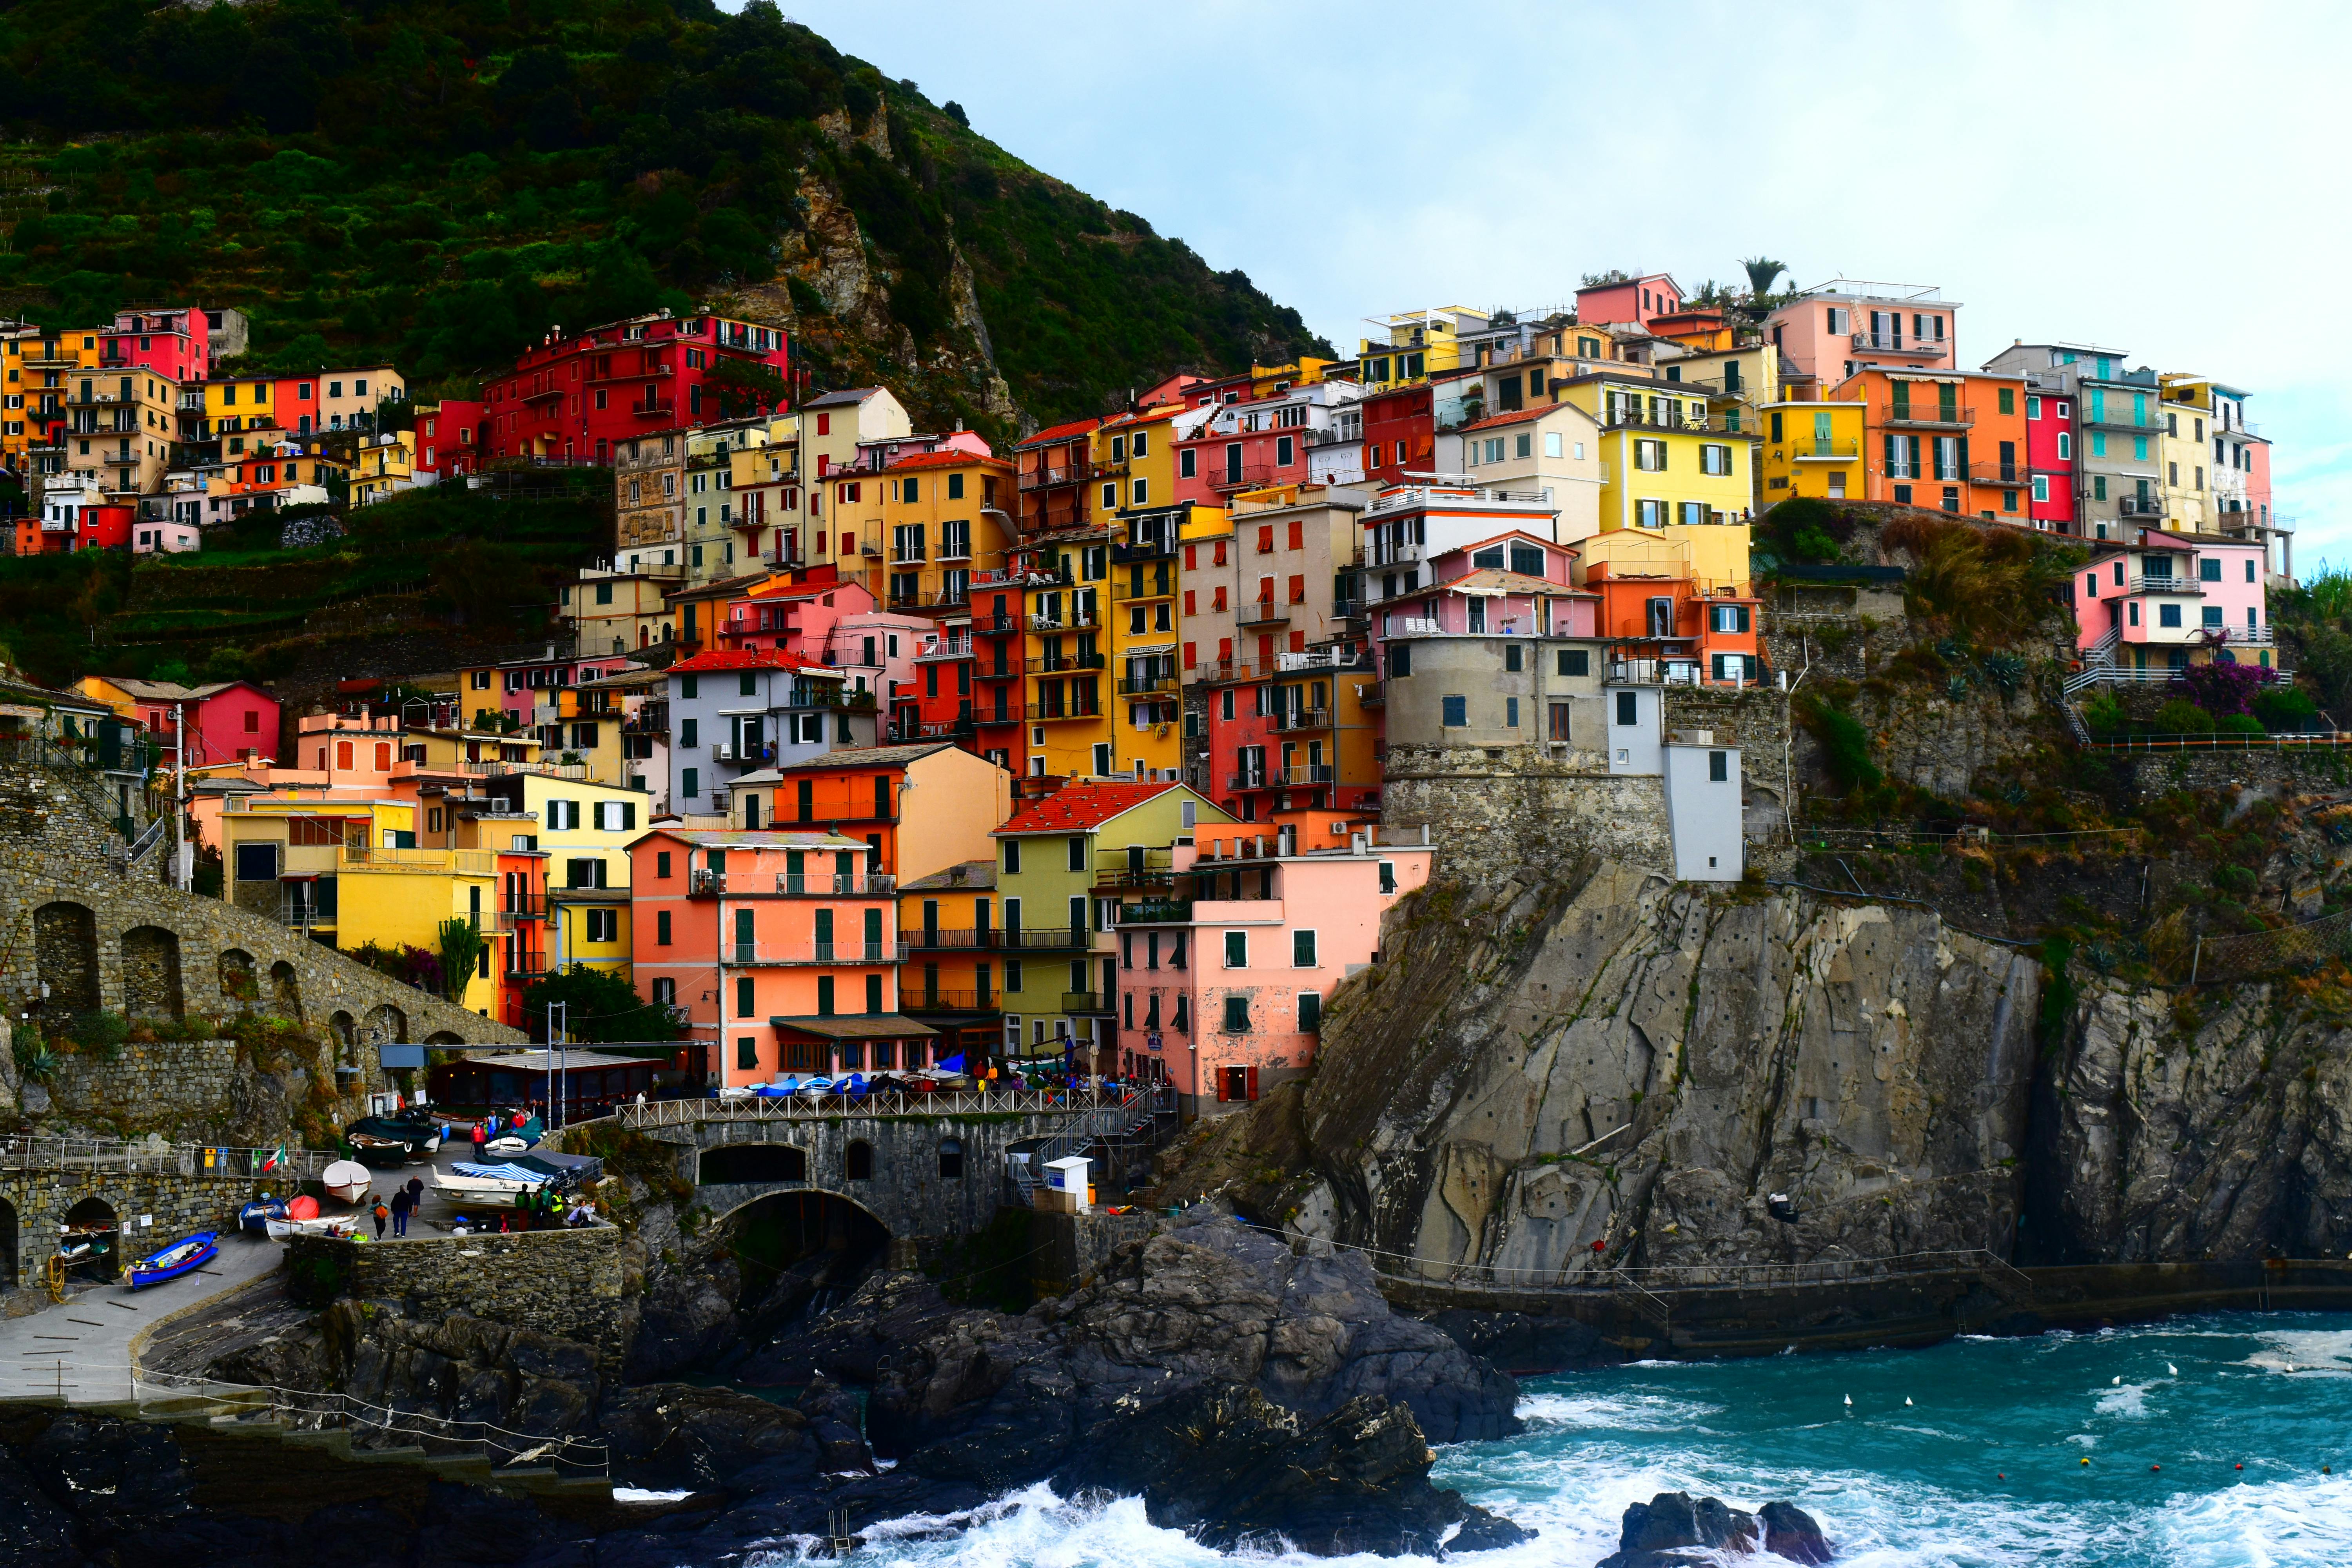 Discover the Hidden Beauty of Cinque Terre with Our Guided Tours